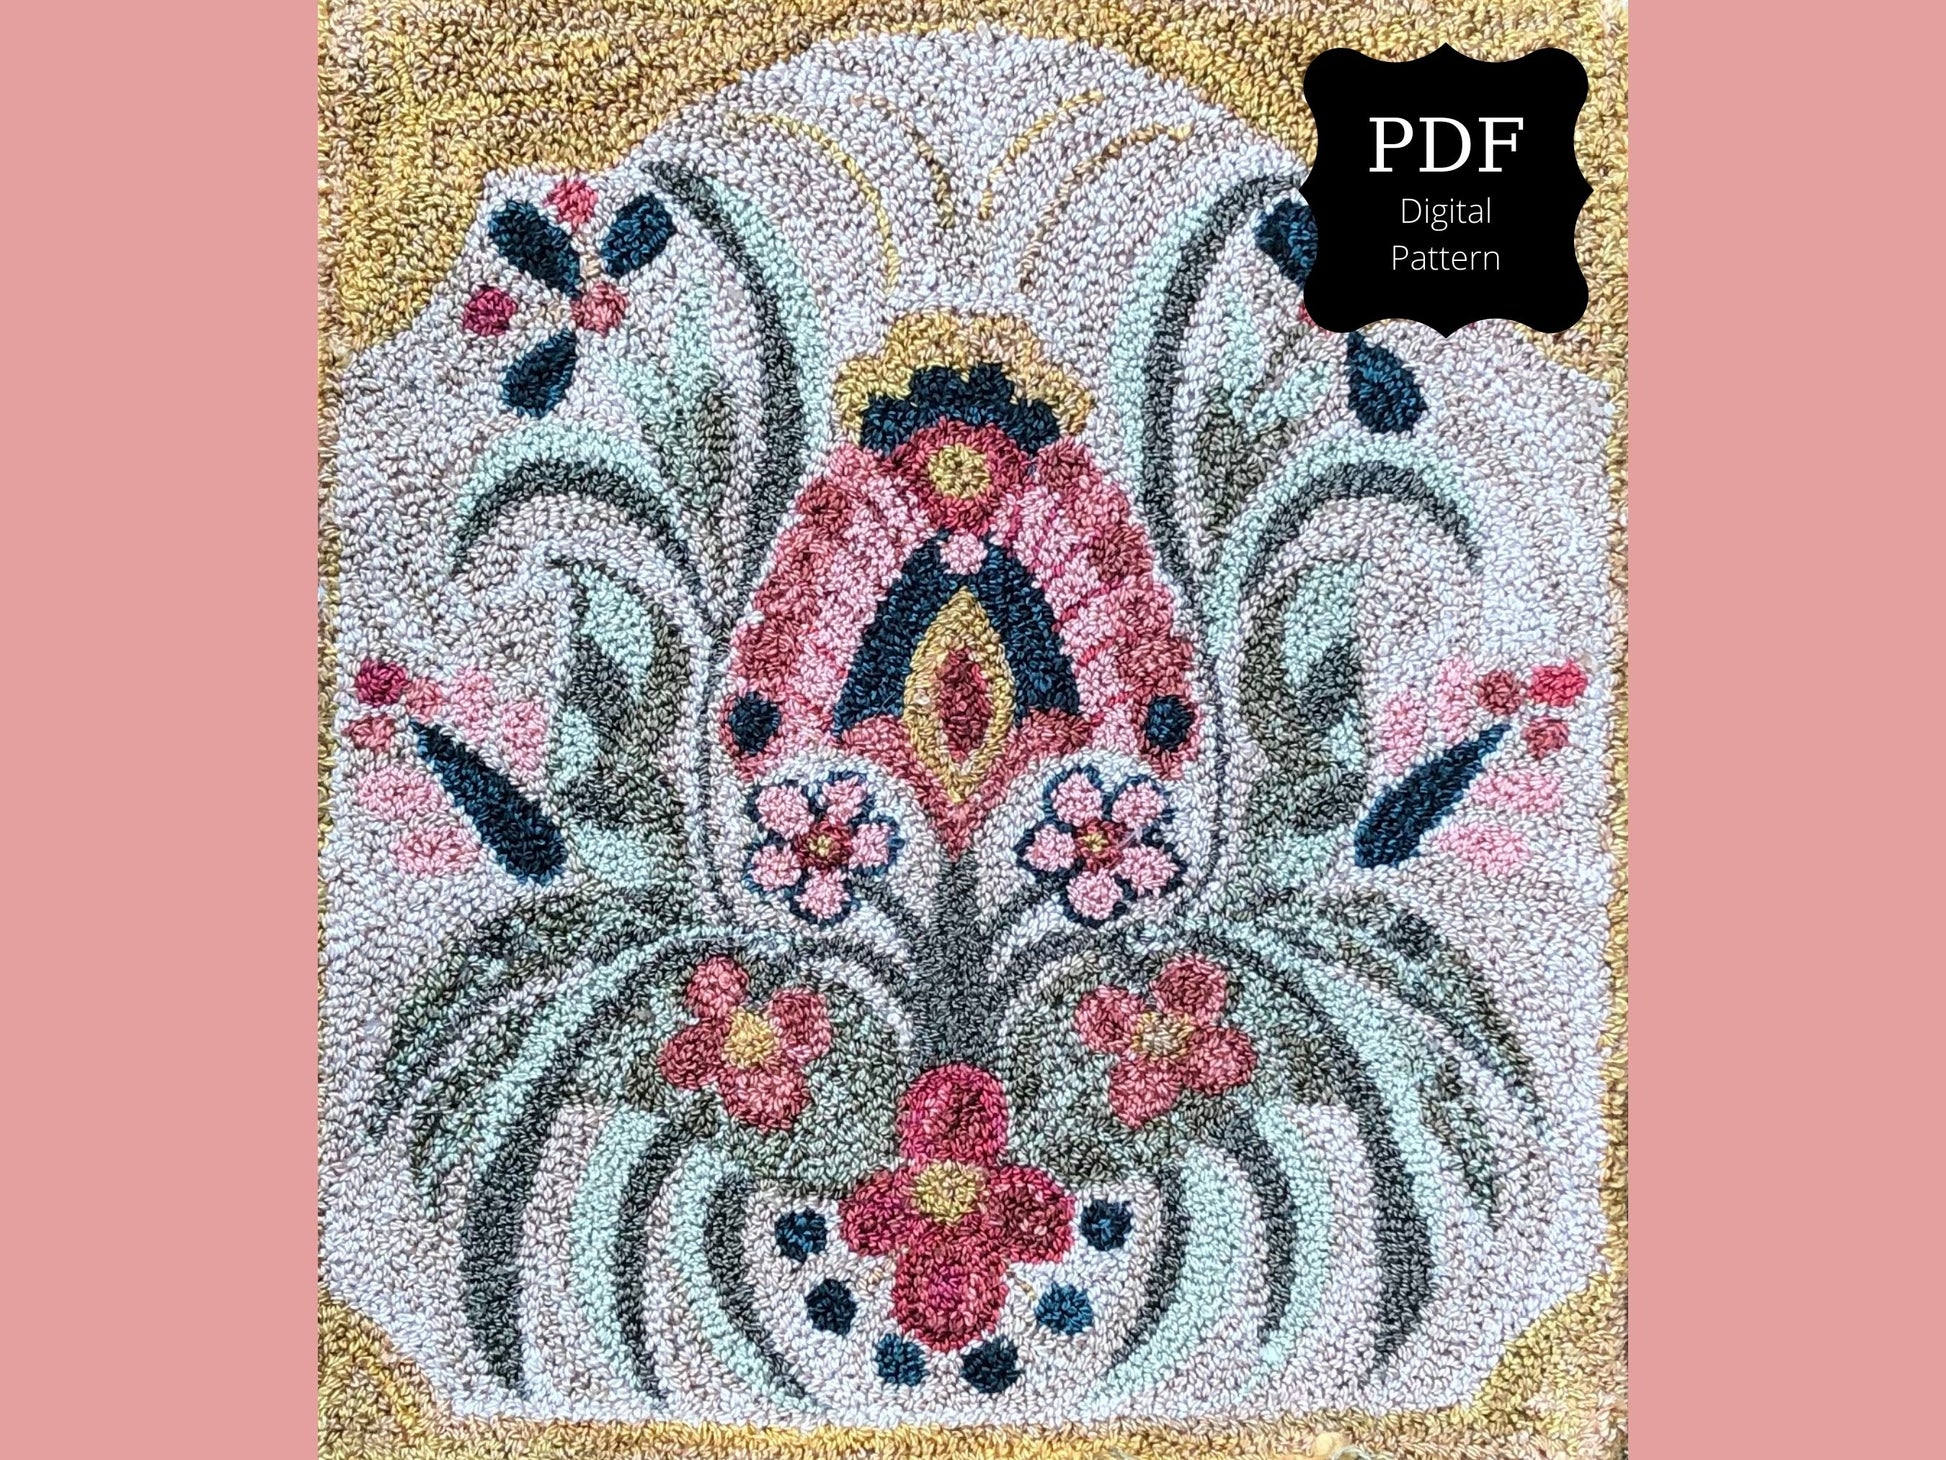 Gracious PDF Digital Punch Needle Pattern by Orphaned Wool. This is a beautiful floral design created by Kelly Kanyok of Orphaned Wool